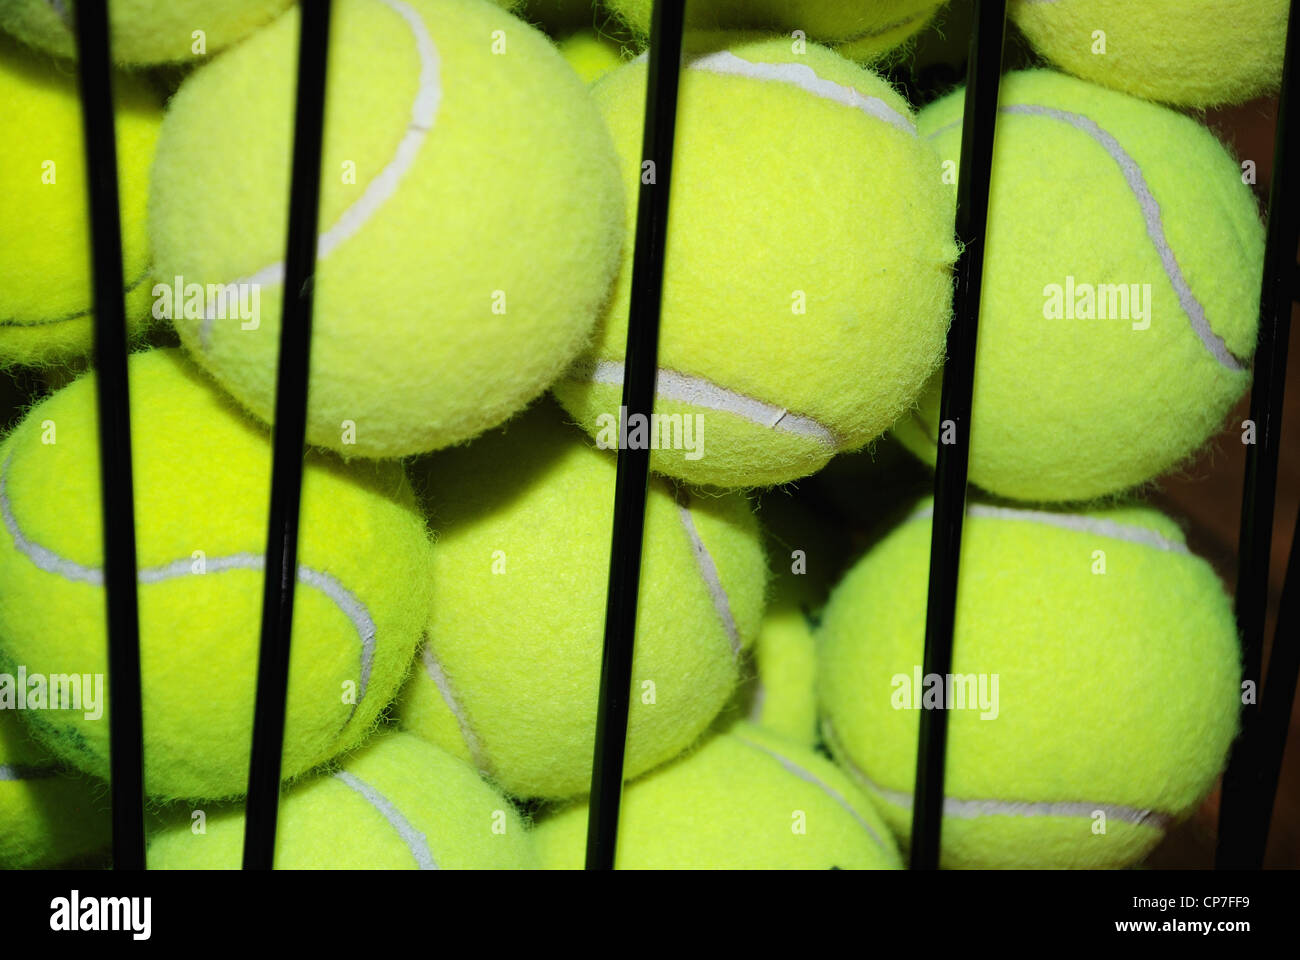 close up of tennis balls in a basket Stock Photo